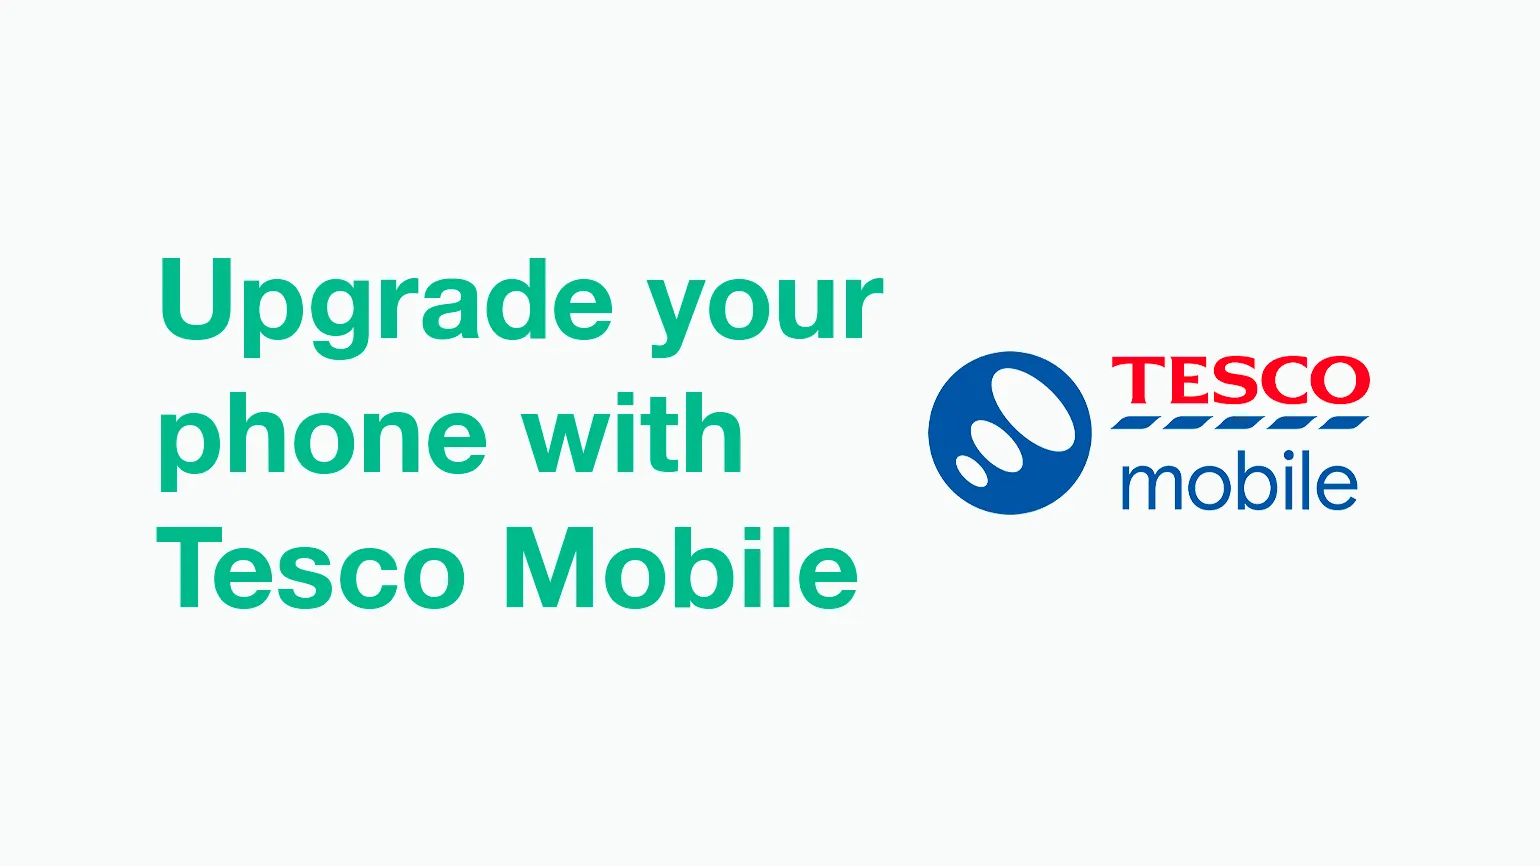 Upgrading your phone on Tesco Mobile